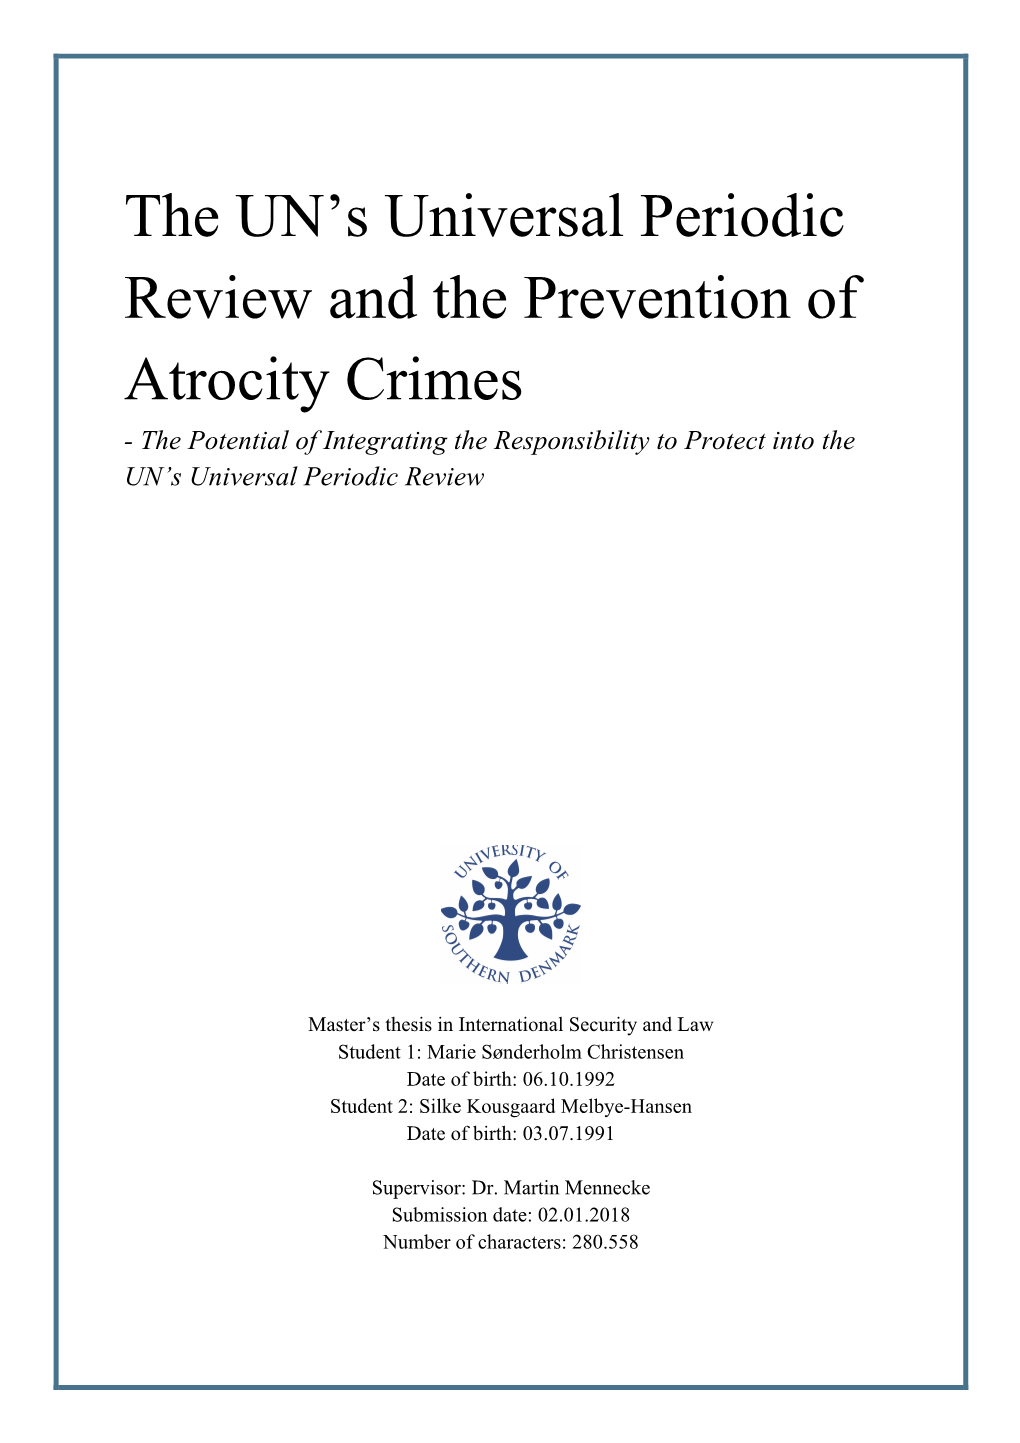 The UN's Universal Periodic Review and the Prevention of Atrocity Crimes